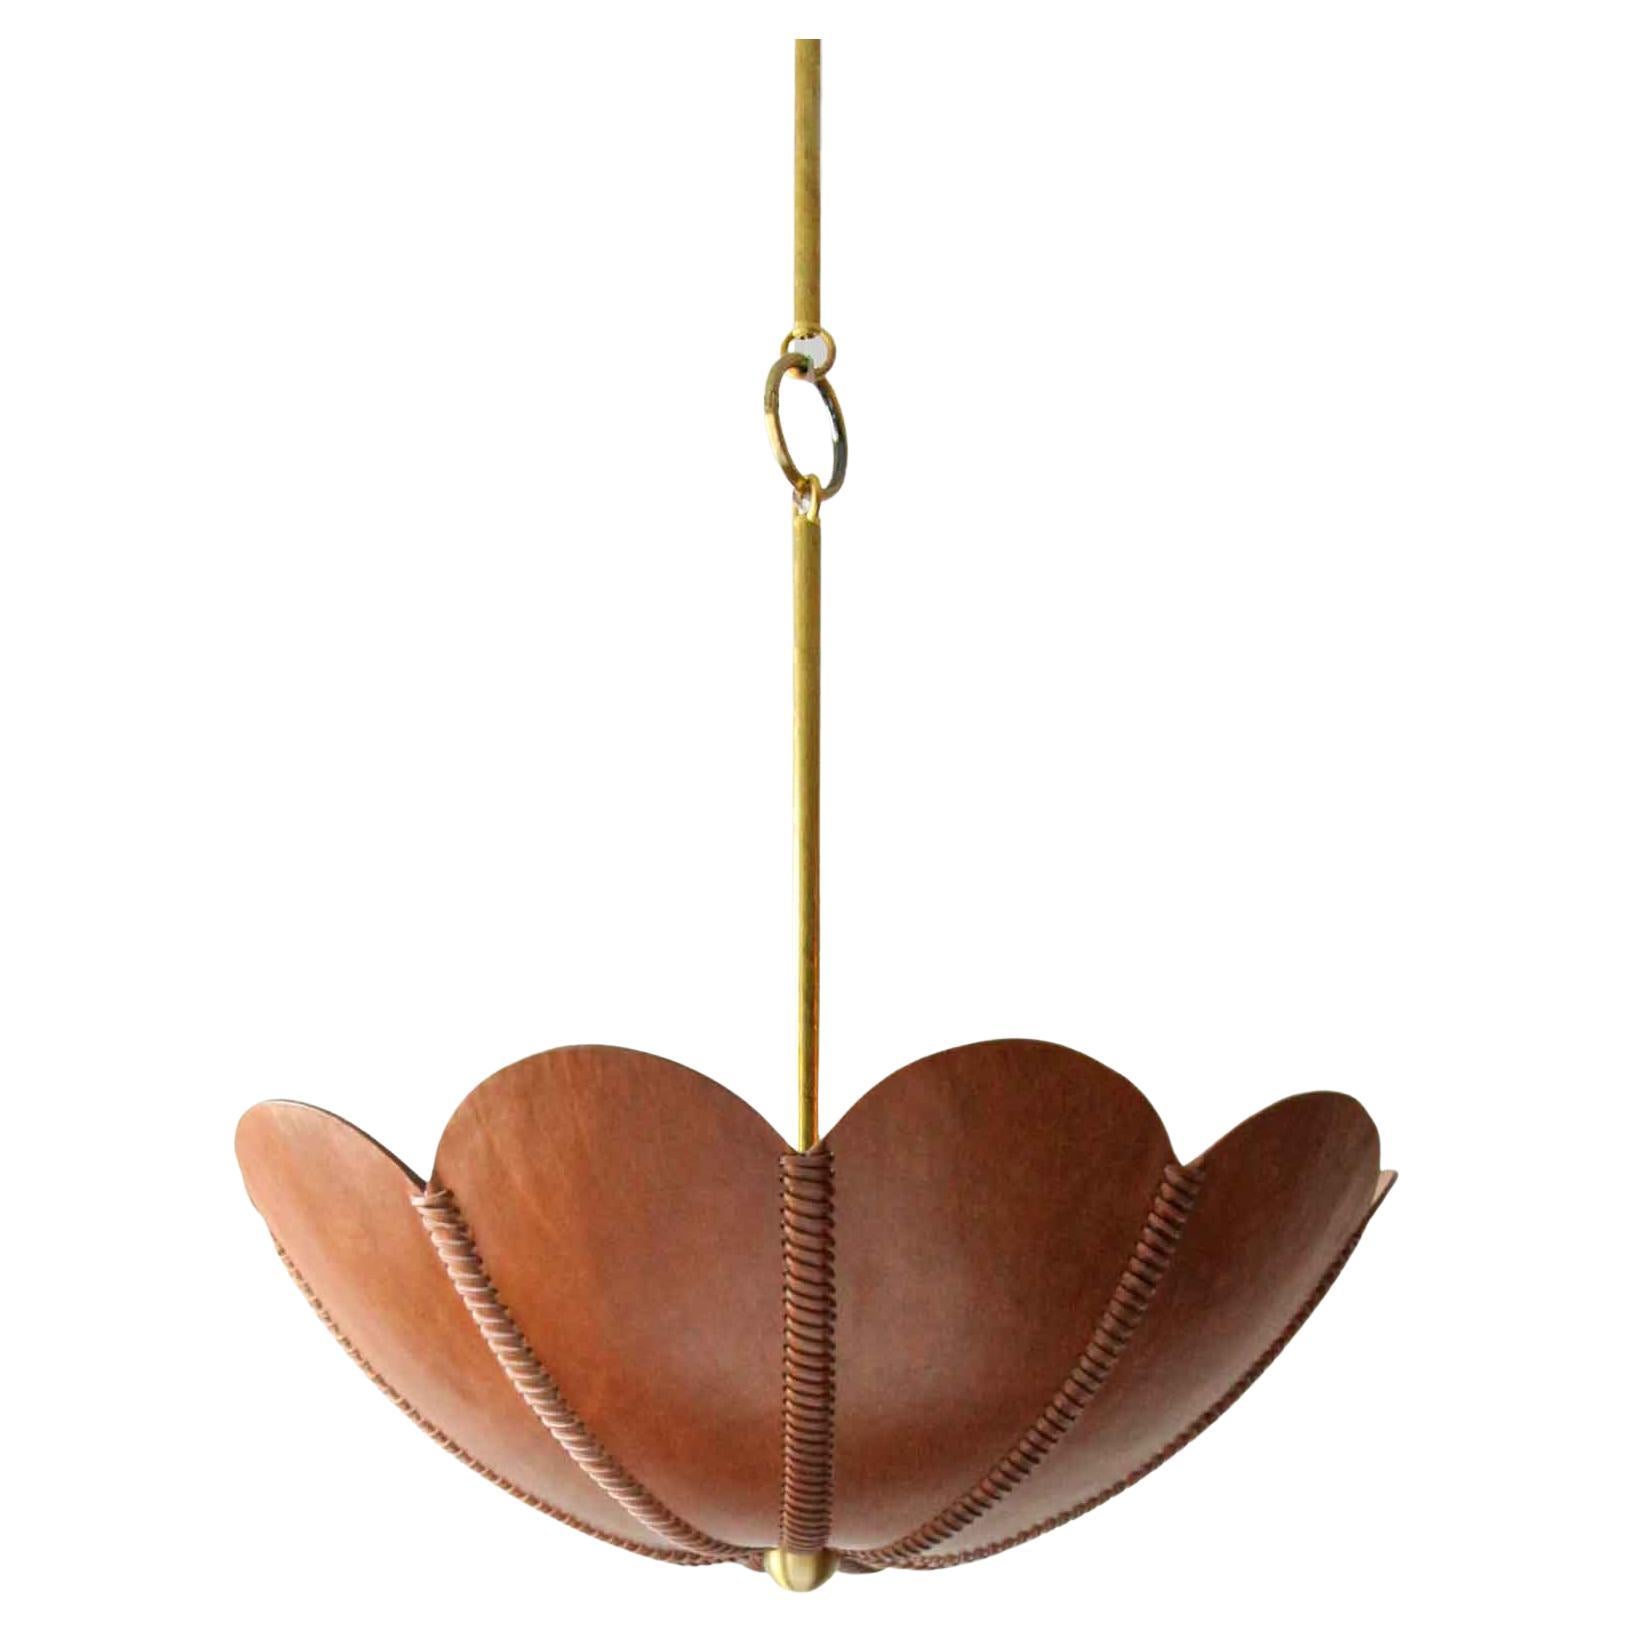 Leather Pendant Light in Camel, Capa, Talabartero Saddle Lamp Collection